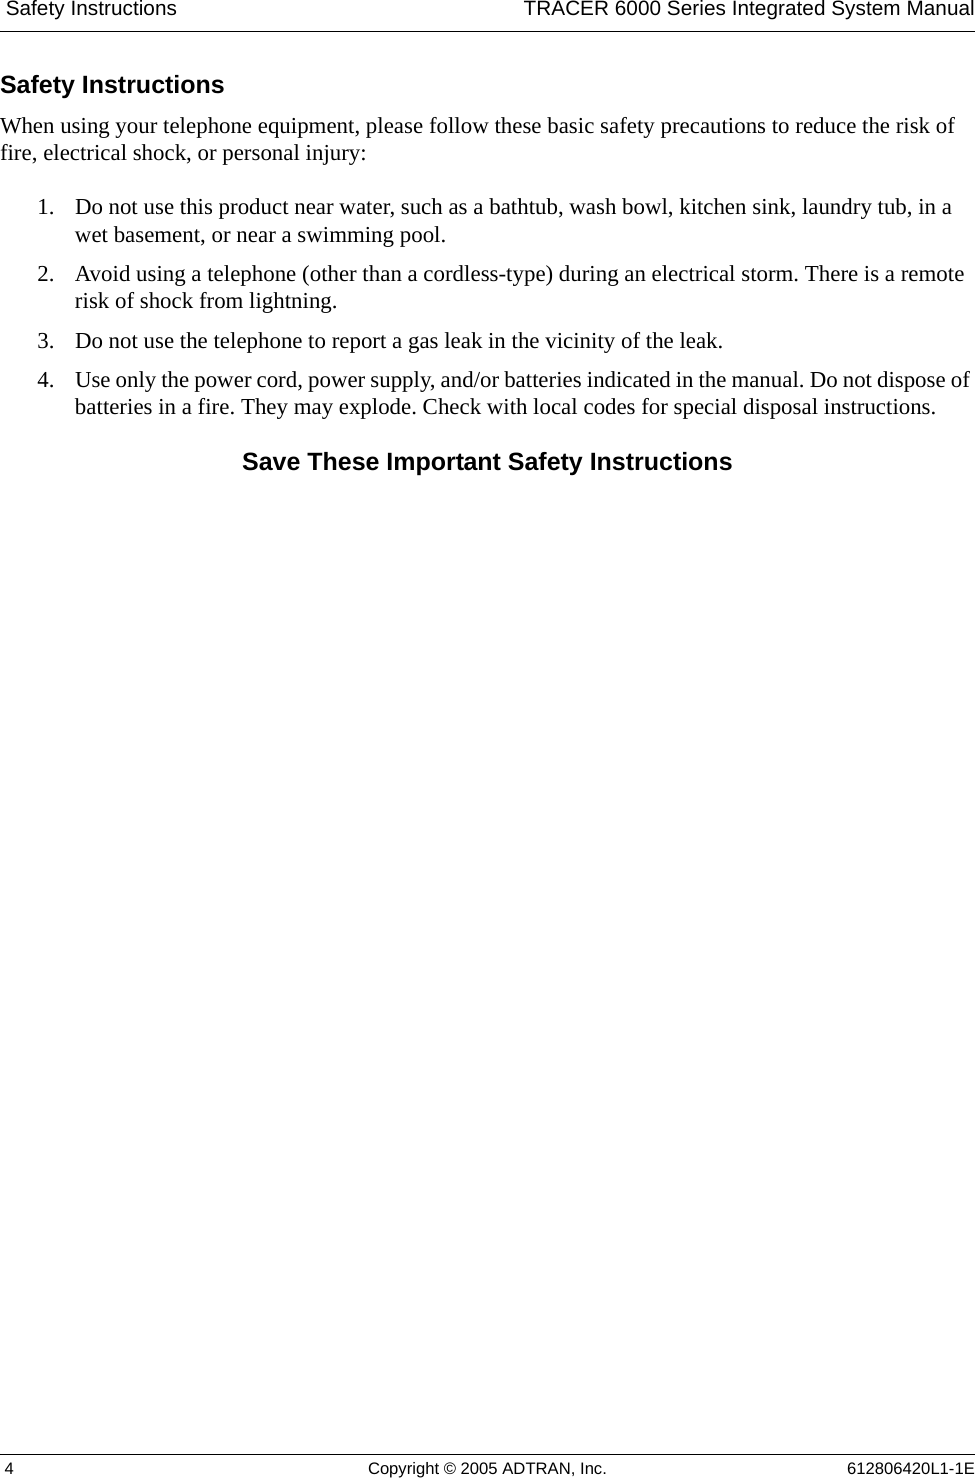  Safety Instructions TRACER 6000 Series Integrated System Manual 4 Copyright © 2005 ADTRAN, Inc. 612806420L1-1ESafety InstructionsWhen using your telephone equipment, please follow these basic safety precautions to reduce the risk of fire, electrical shock, or personal injury:1. Do not use this product near water, such as a bathtub, wash bowl, kitchen sink, laundry tub, in a wet basement, or near a swimming pool.2. Avoid using a telephone (other than a cordless-type) during an electrical storm. There is a remote risk of shock from lightning.3. Do not use the telephone to report a gas leak in the vicinity of the leak.4. Use only the power cord, power supply, and/or batteries indicated in the manual. Do not dispose of batteries in a fire. They may explode. Check with local codes for special disposal instructions.Save These Important Safety Instructions